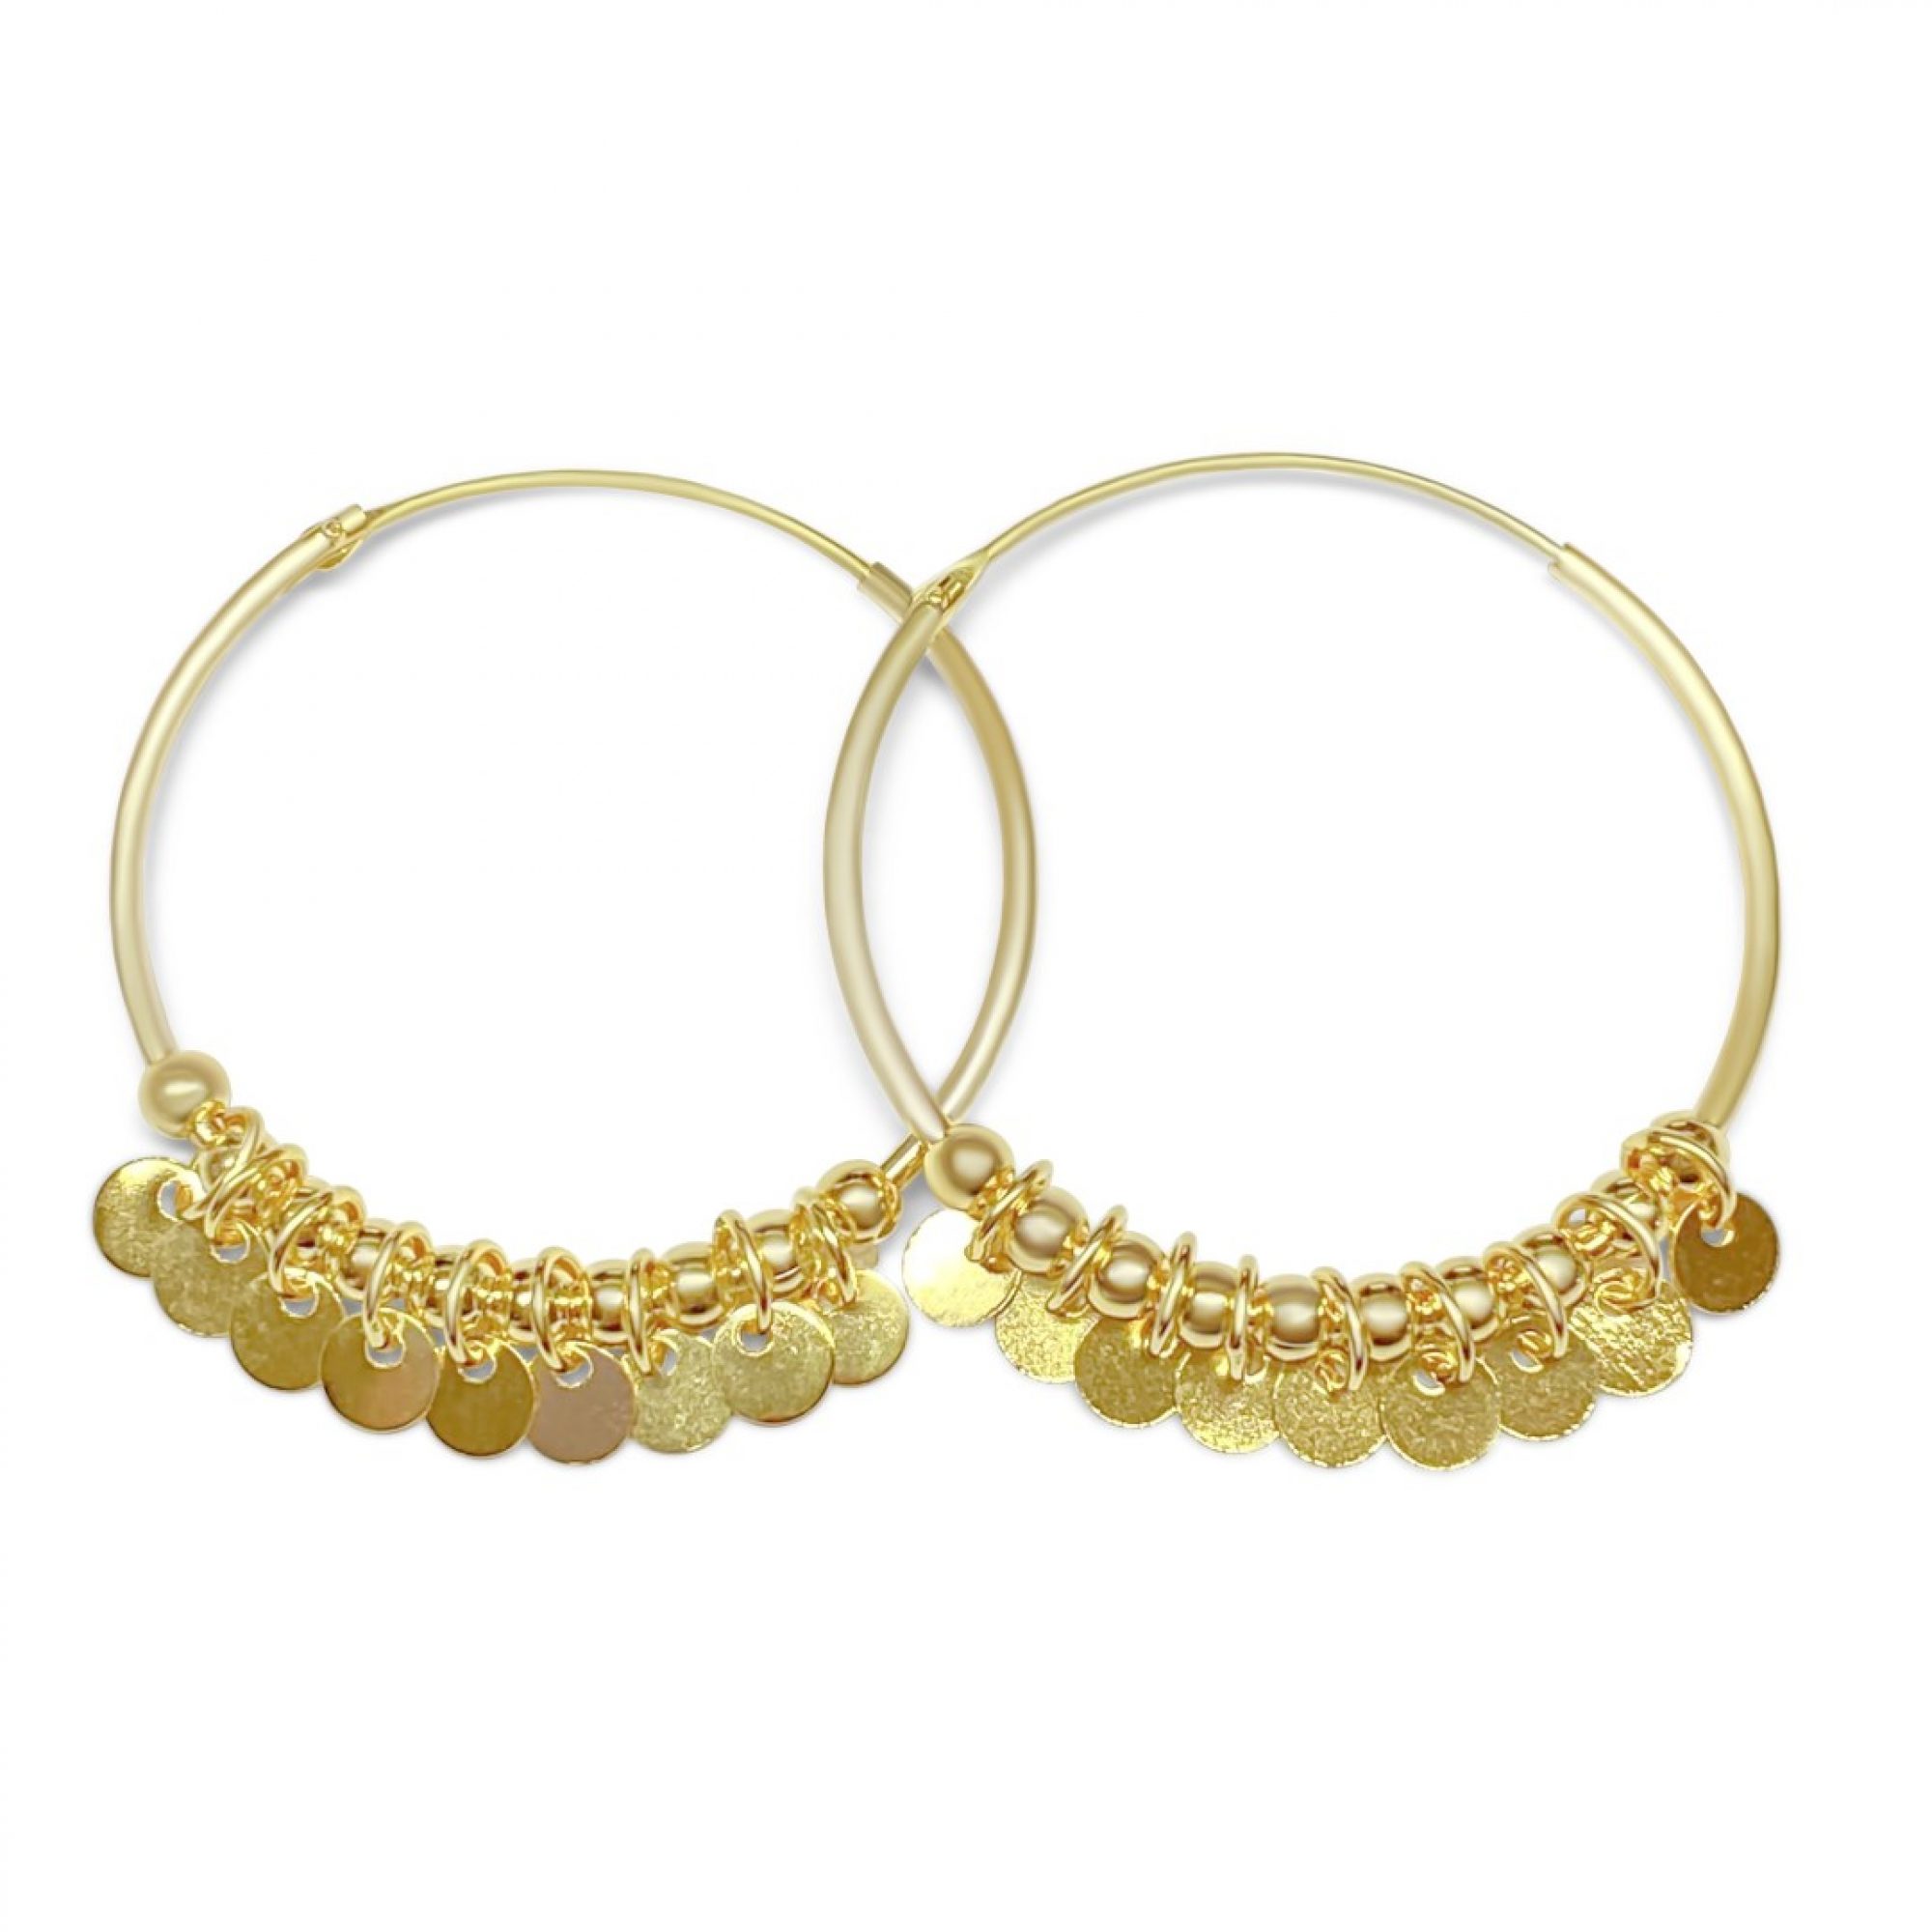 Gold plated hoops with dangles